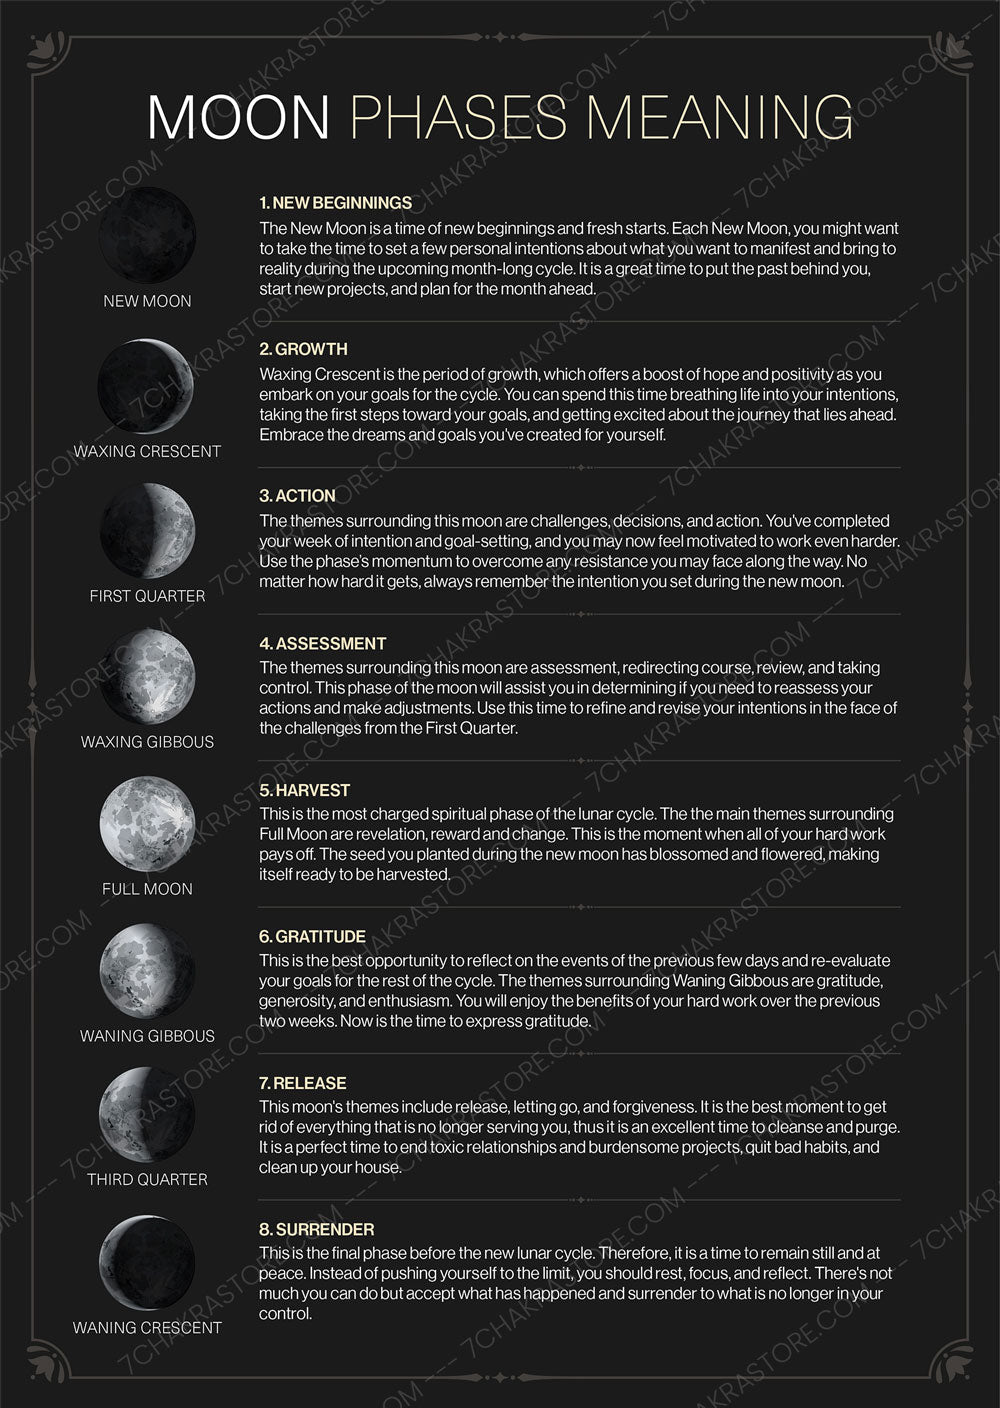 Definition of Phases of the Moon